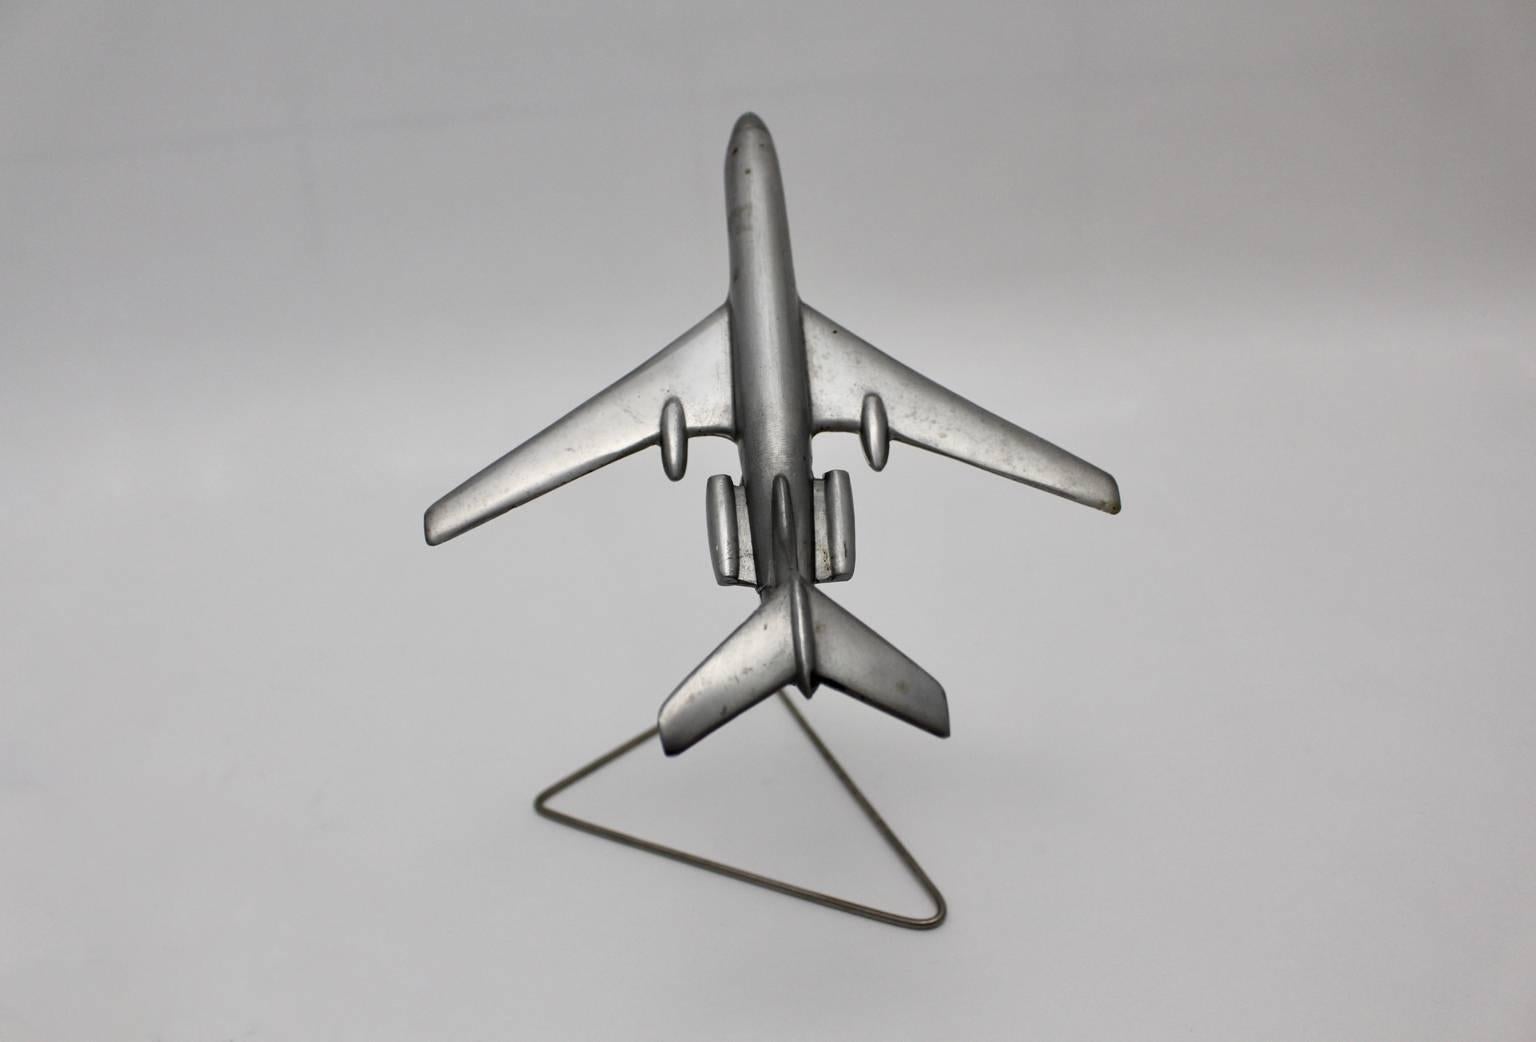 This airplane model was made of aluminium and was designed and executed in the 1960s.
It features a metal holder.

The condition is very good with beautiful patina.